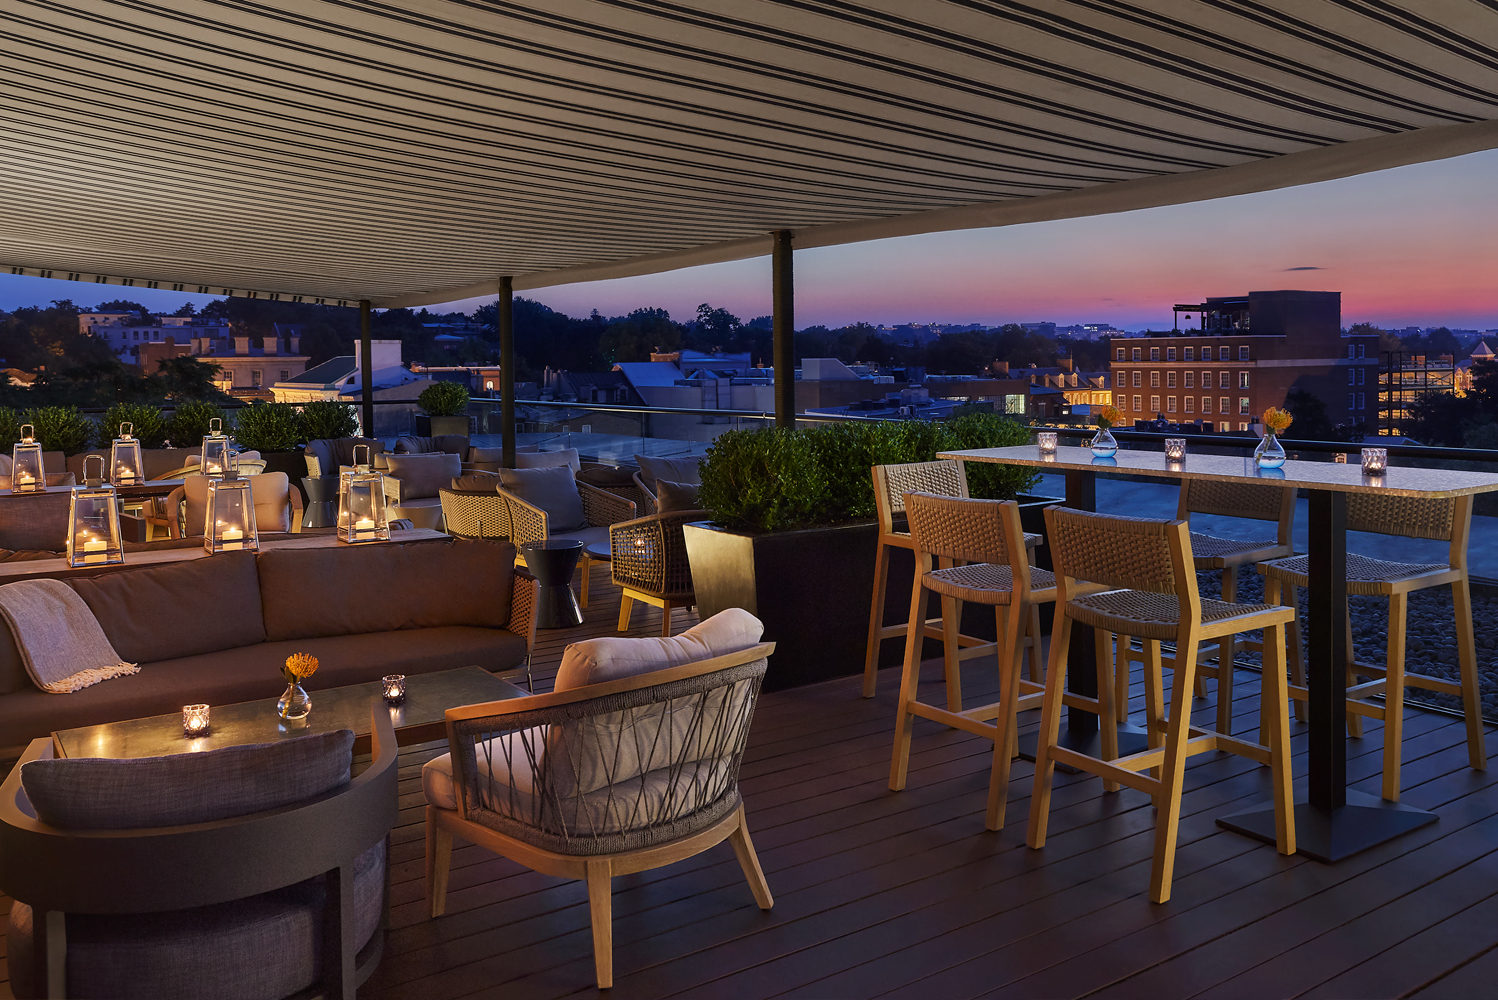 Set against the capital citys skyline the hotels new rooftop bar and lounge CUT Above offers al fresco entertaining